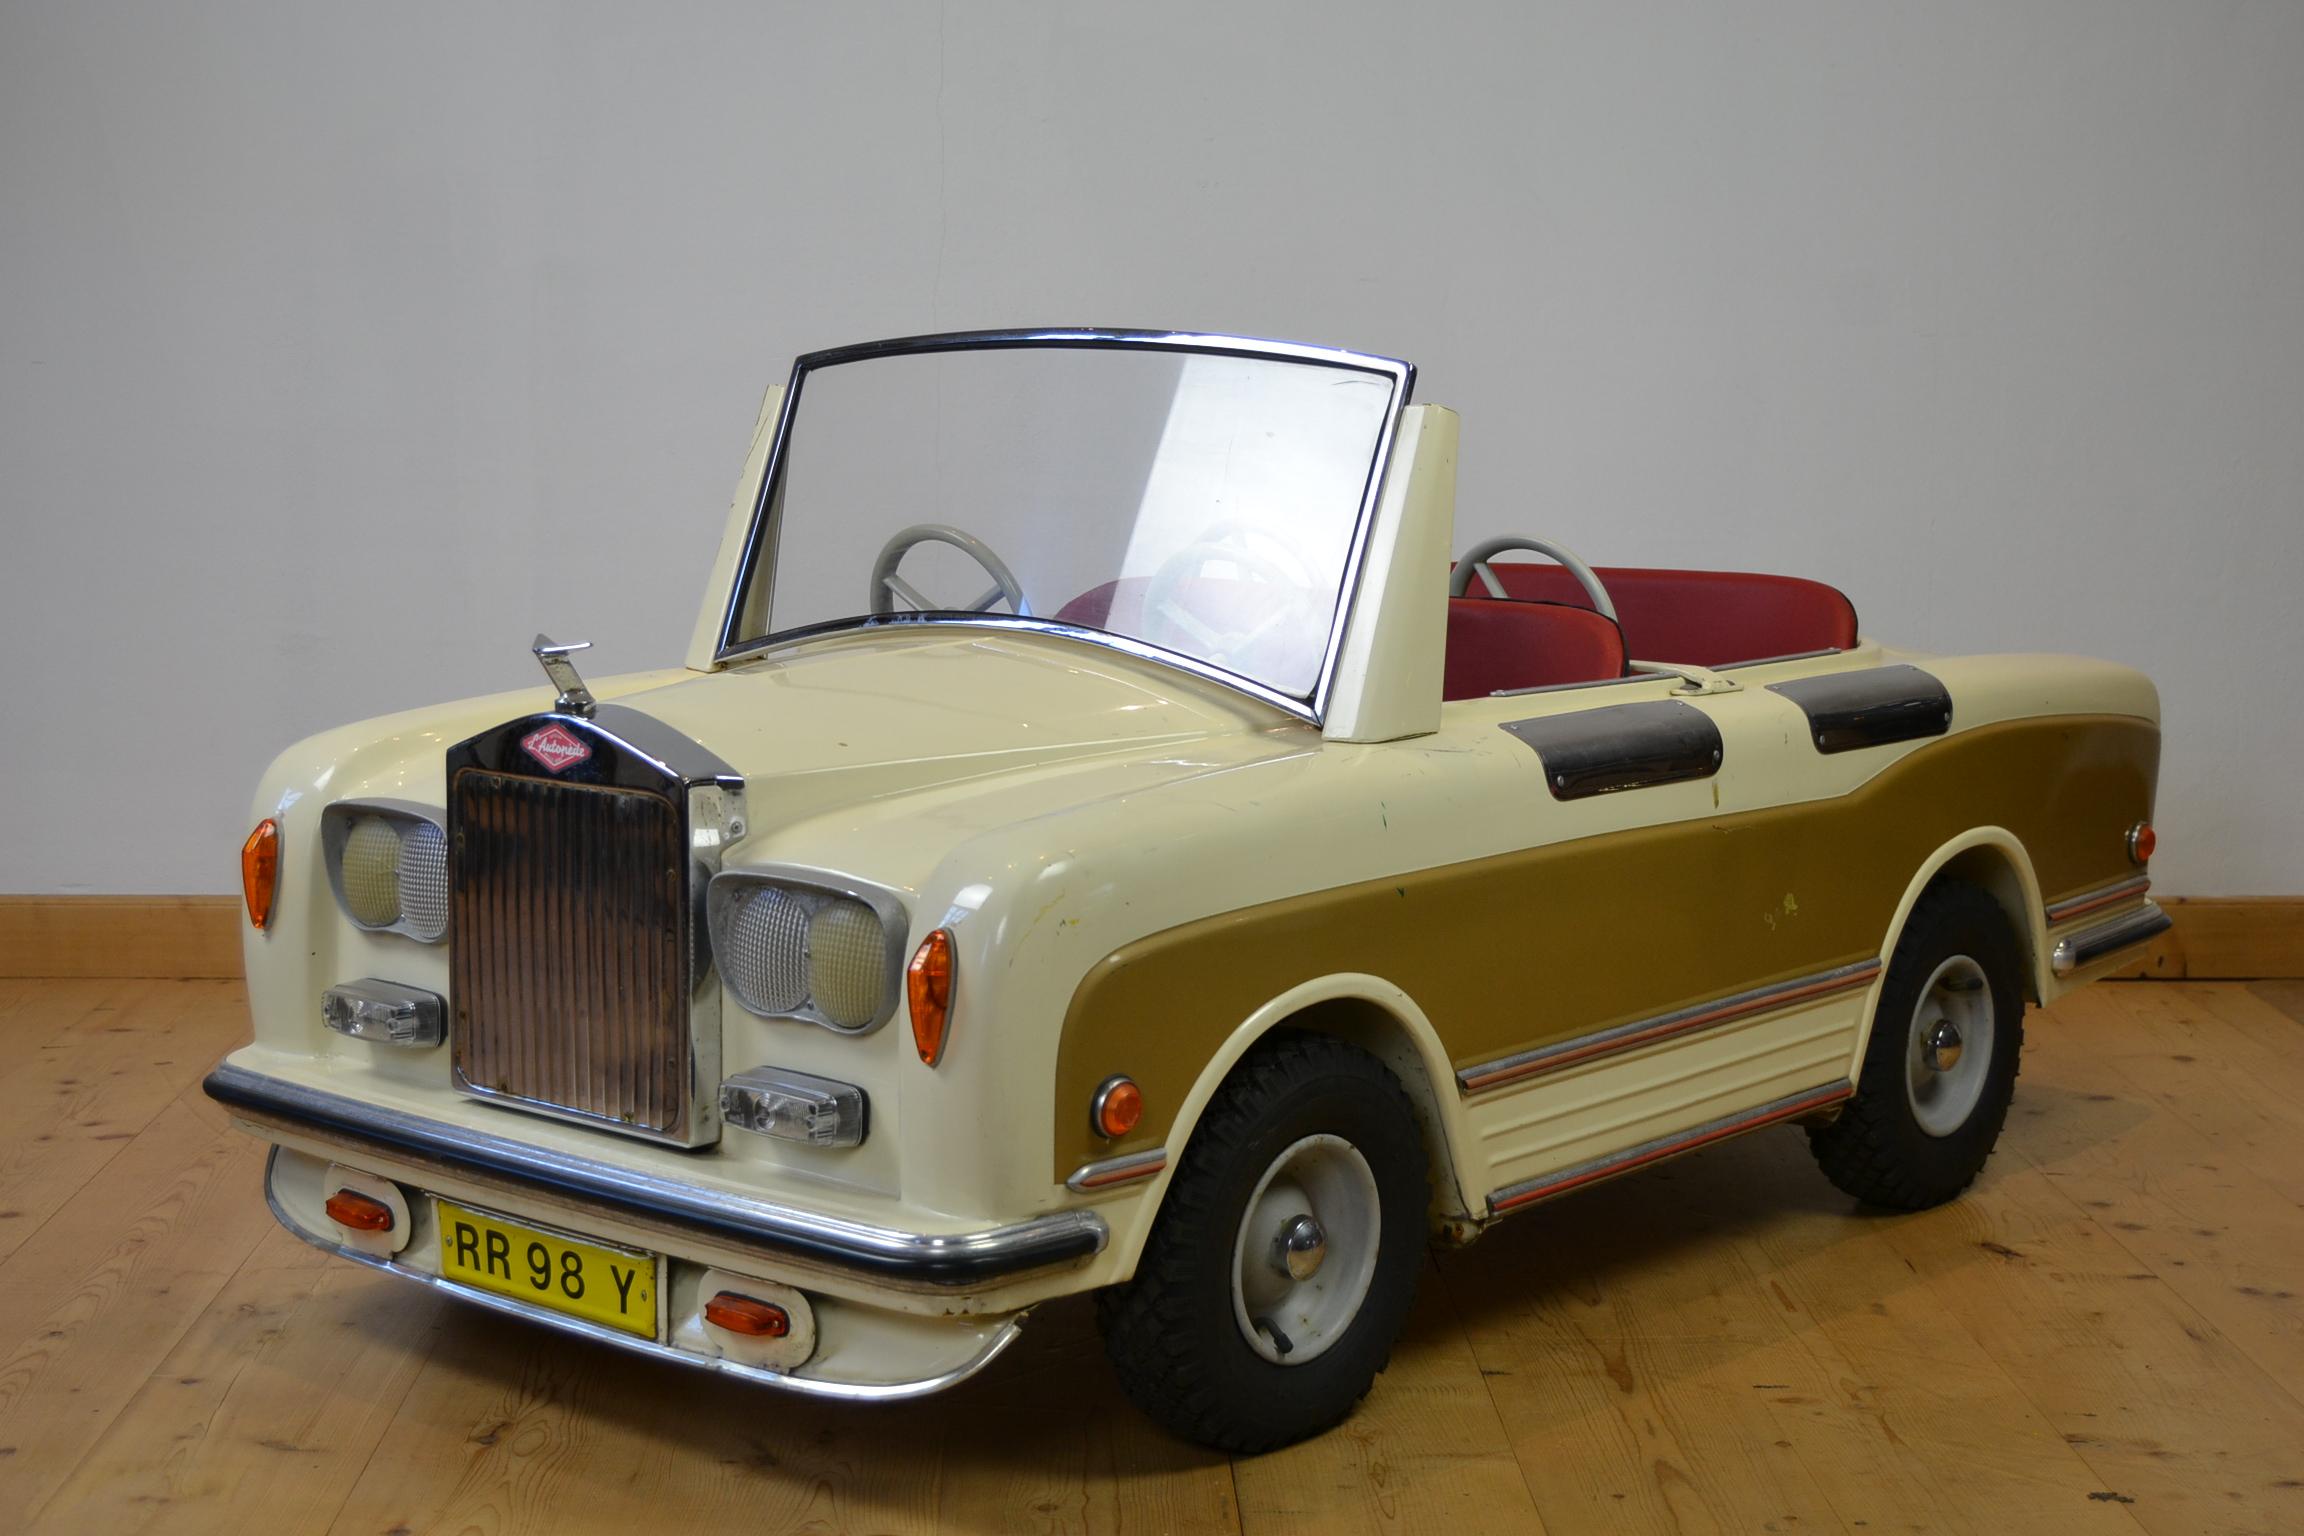 Exceptional Fairground Rolls Royce Car type Corniche Convertible.
This Carnival Ride Car for 4 children was handmade from metal - steel plate by Atelier L' Autopède Belgium.
Made and designed in the 1980s by Alain Baeyens, the Son of Karel